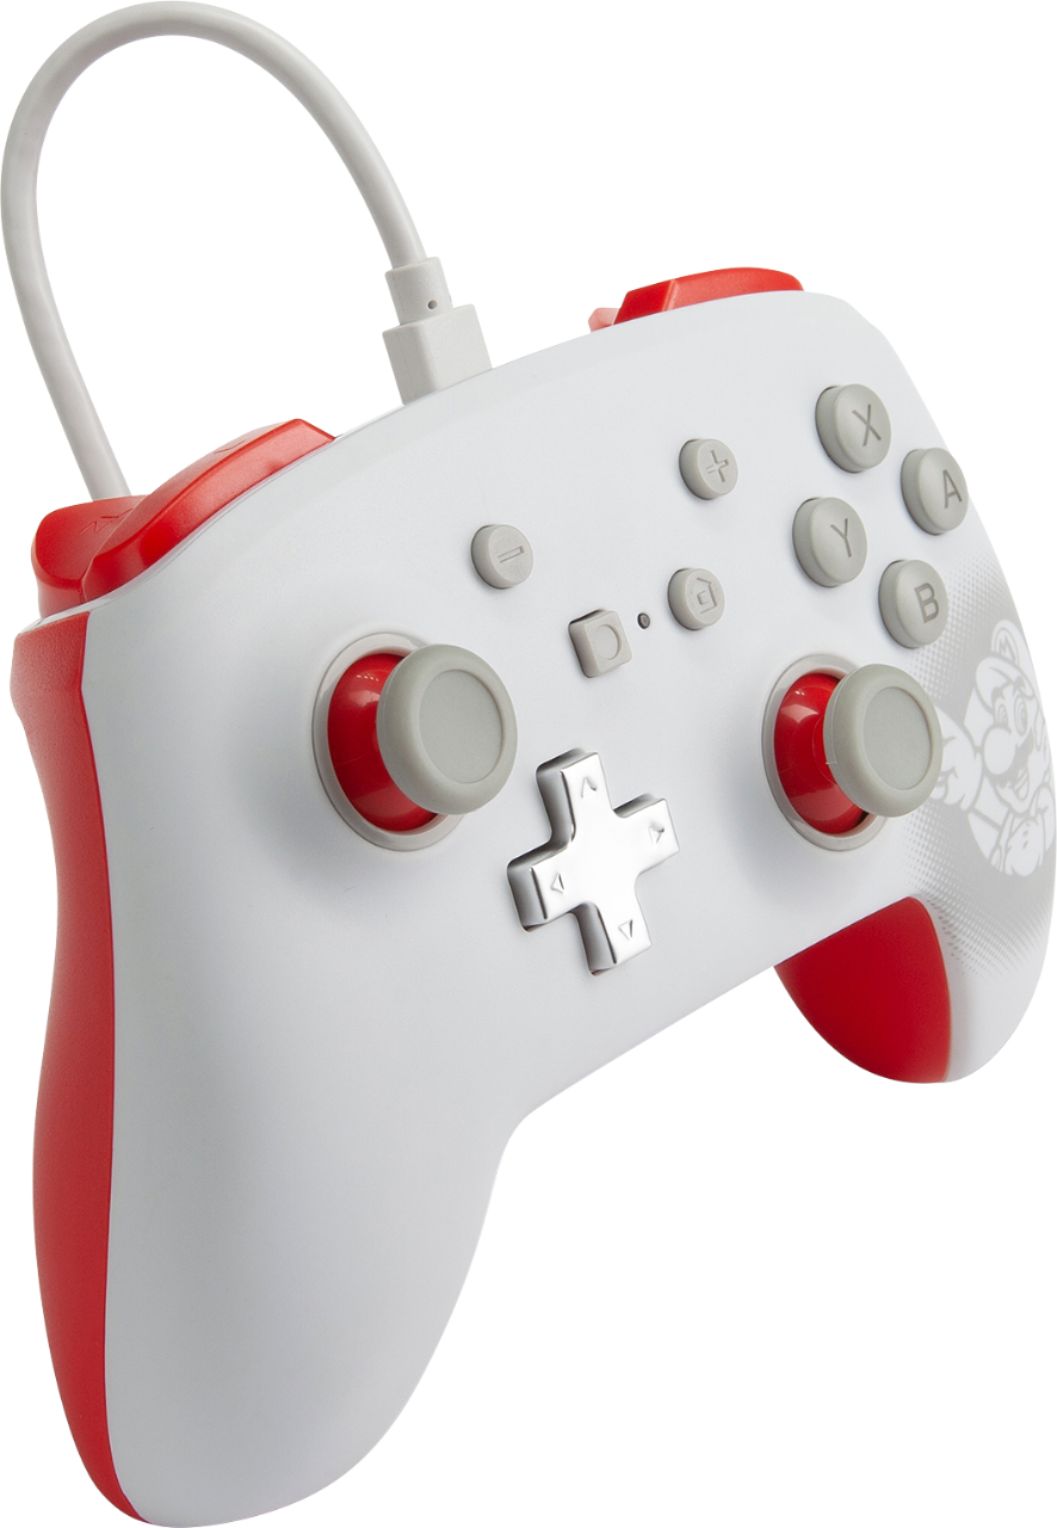 Angle View: PowerA - Enhanced Wired Controller for Nintendo Switch - Mario White